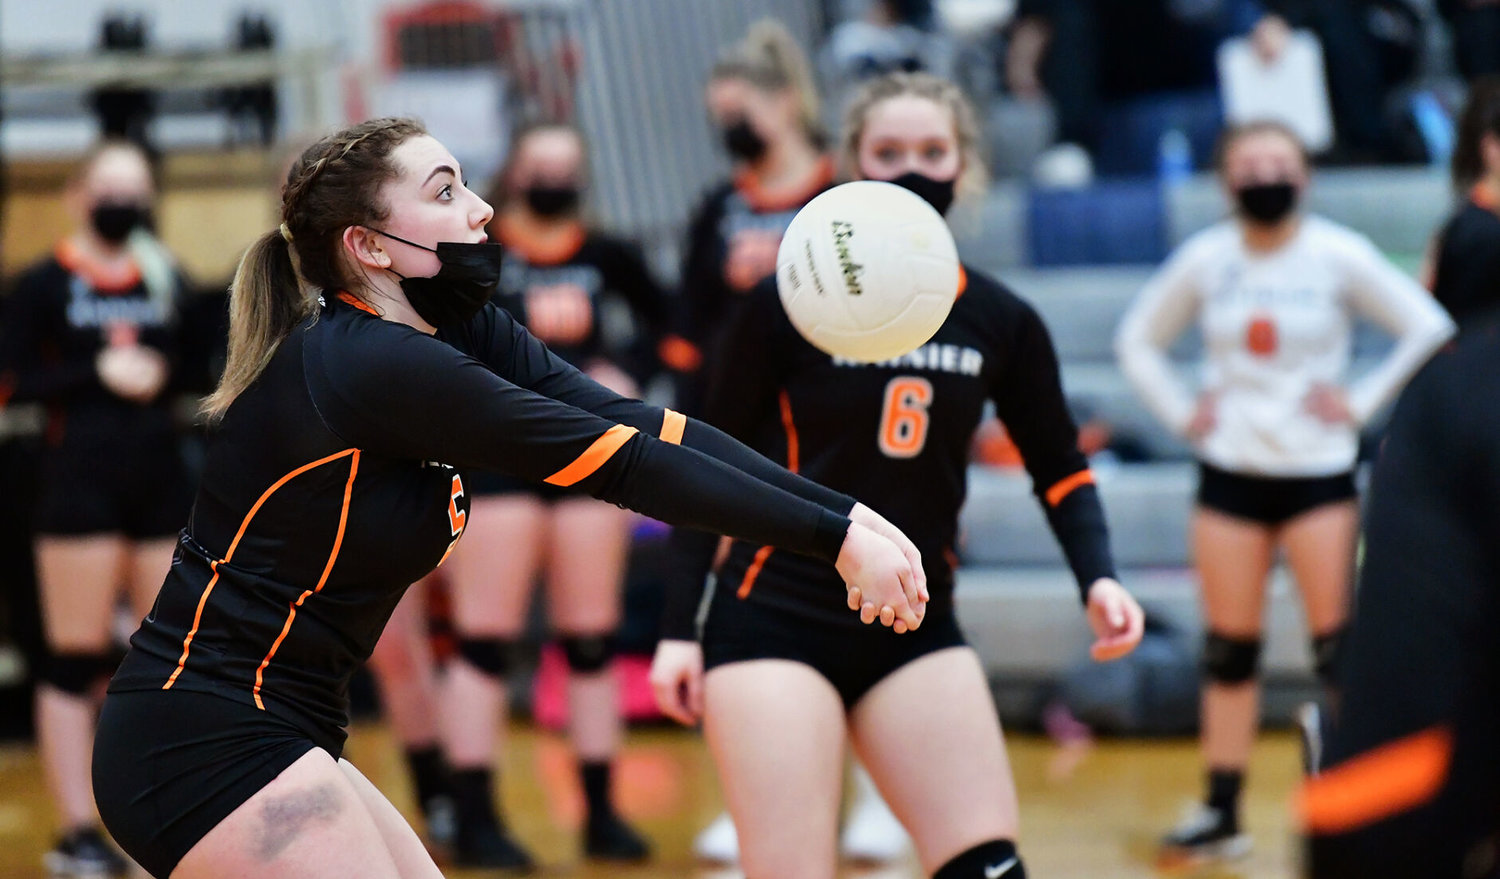 Rainier High School's Victoria Wadsworth bumps the ball to Onalaska High School during a Thursday night, March 4, volleyball match between the two schools.